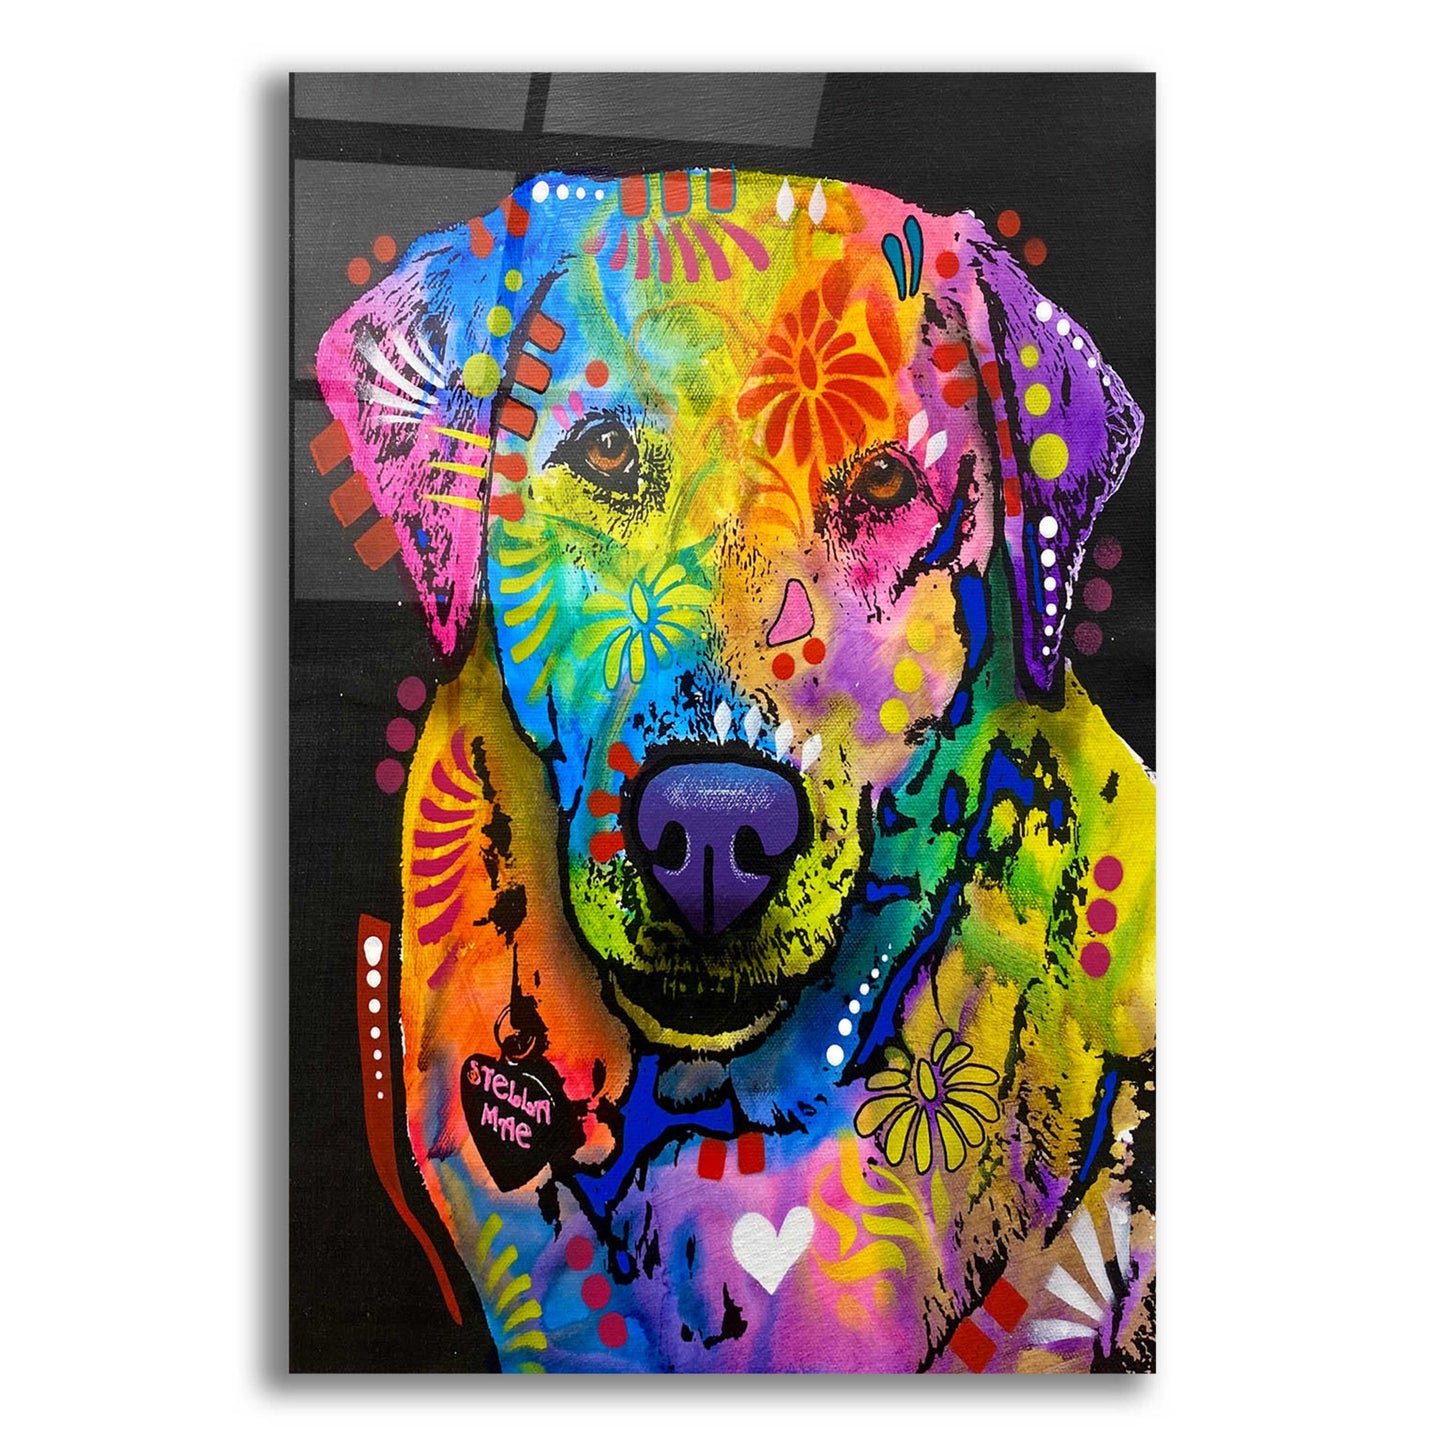 Epic Art 'Don't Do A Thing But Run Around' by Dean Russo, Acrylic Glass Wall Art,12x16